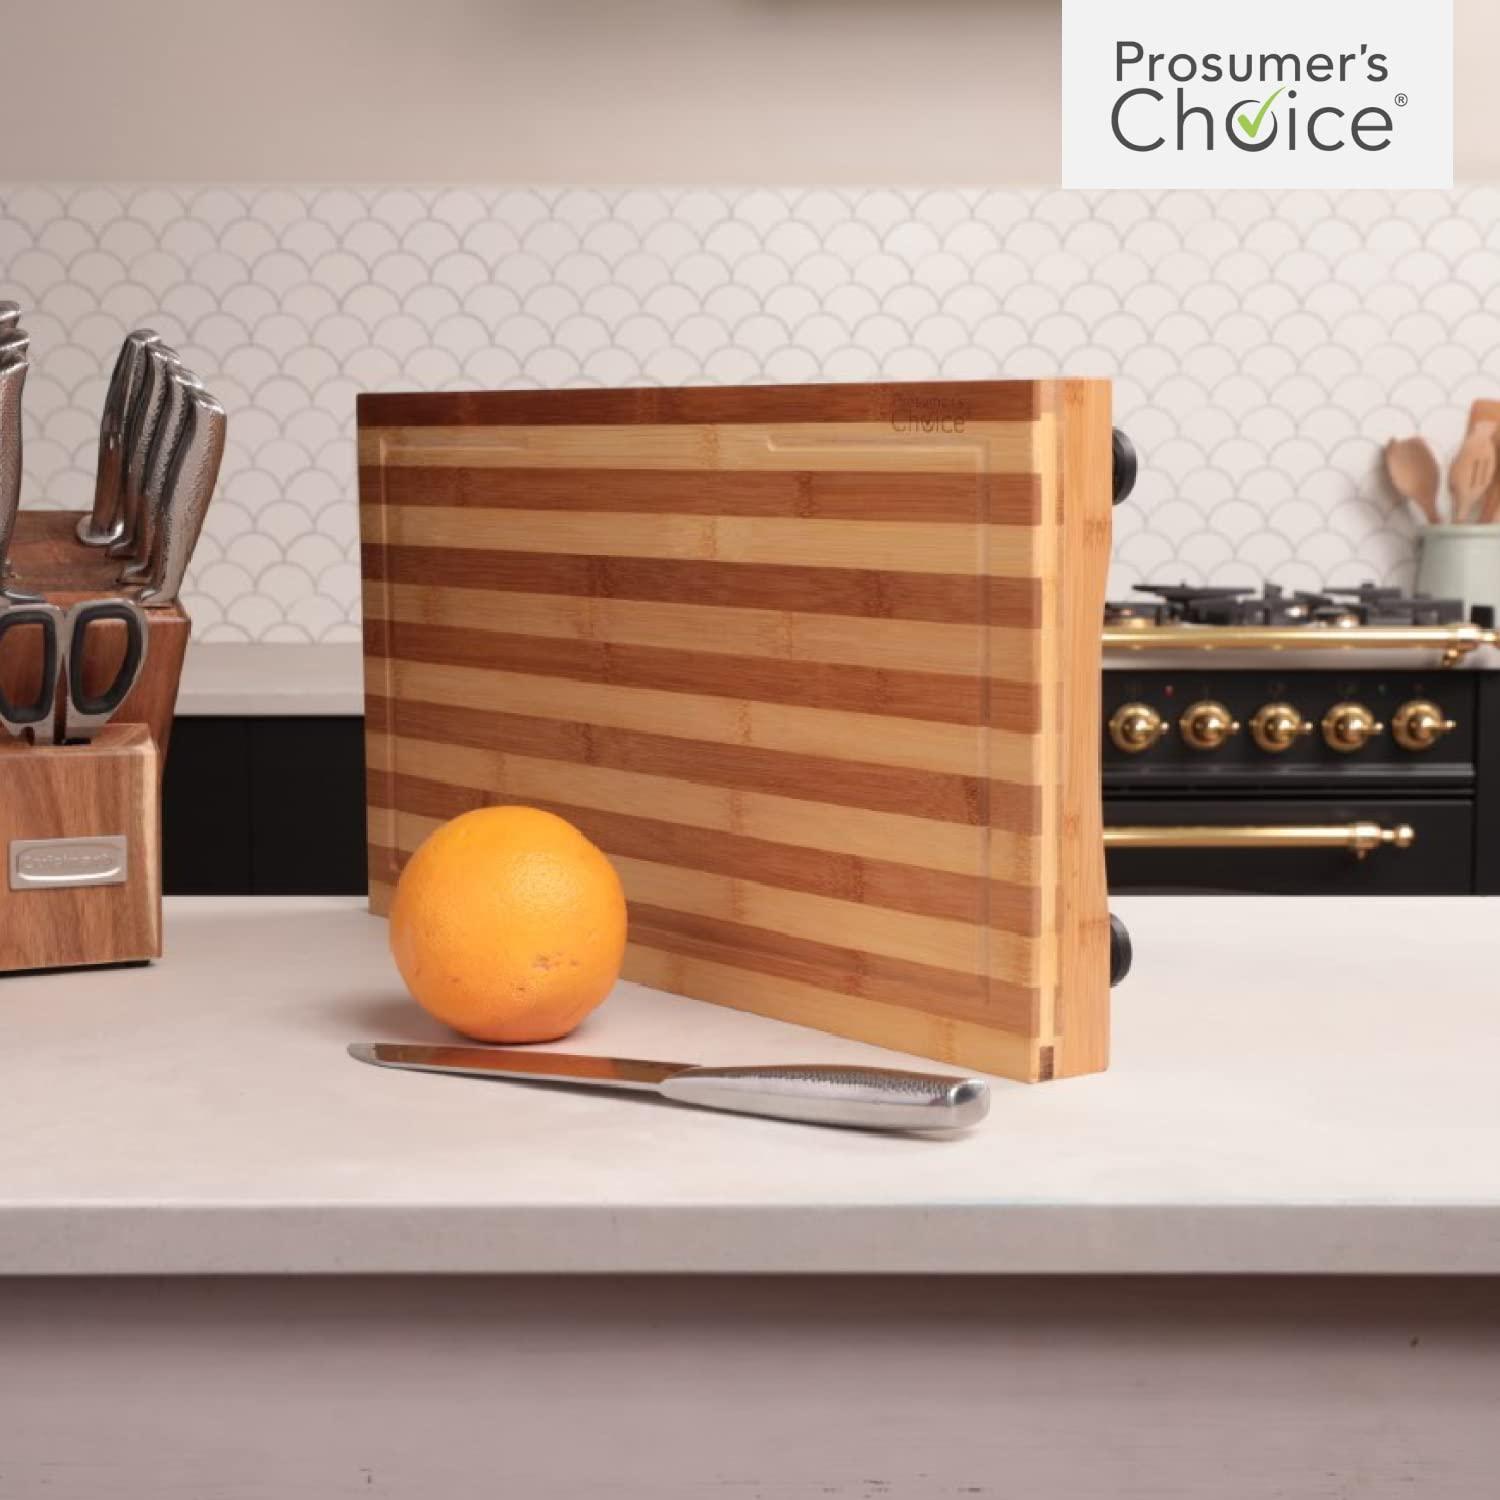 Prosumer's Choice Premium Bamboo Large Cutting Boards | Stovetop Cover with Juice Grooves For Kitchen | Large Wooden Butcher Block for Turkey, Meat, Vegetables, BBQ with Adjustable Legs, 11 X 21.25 - CookCave